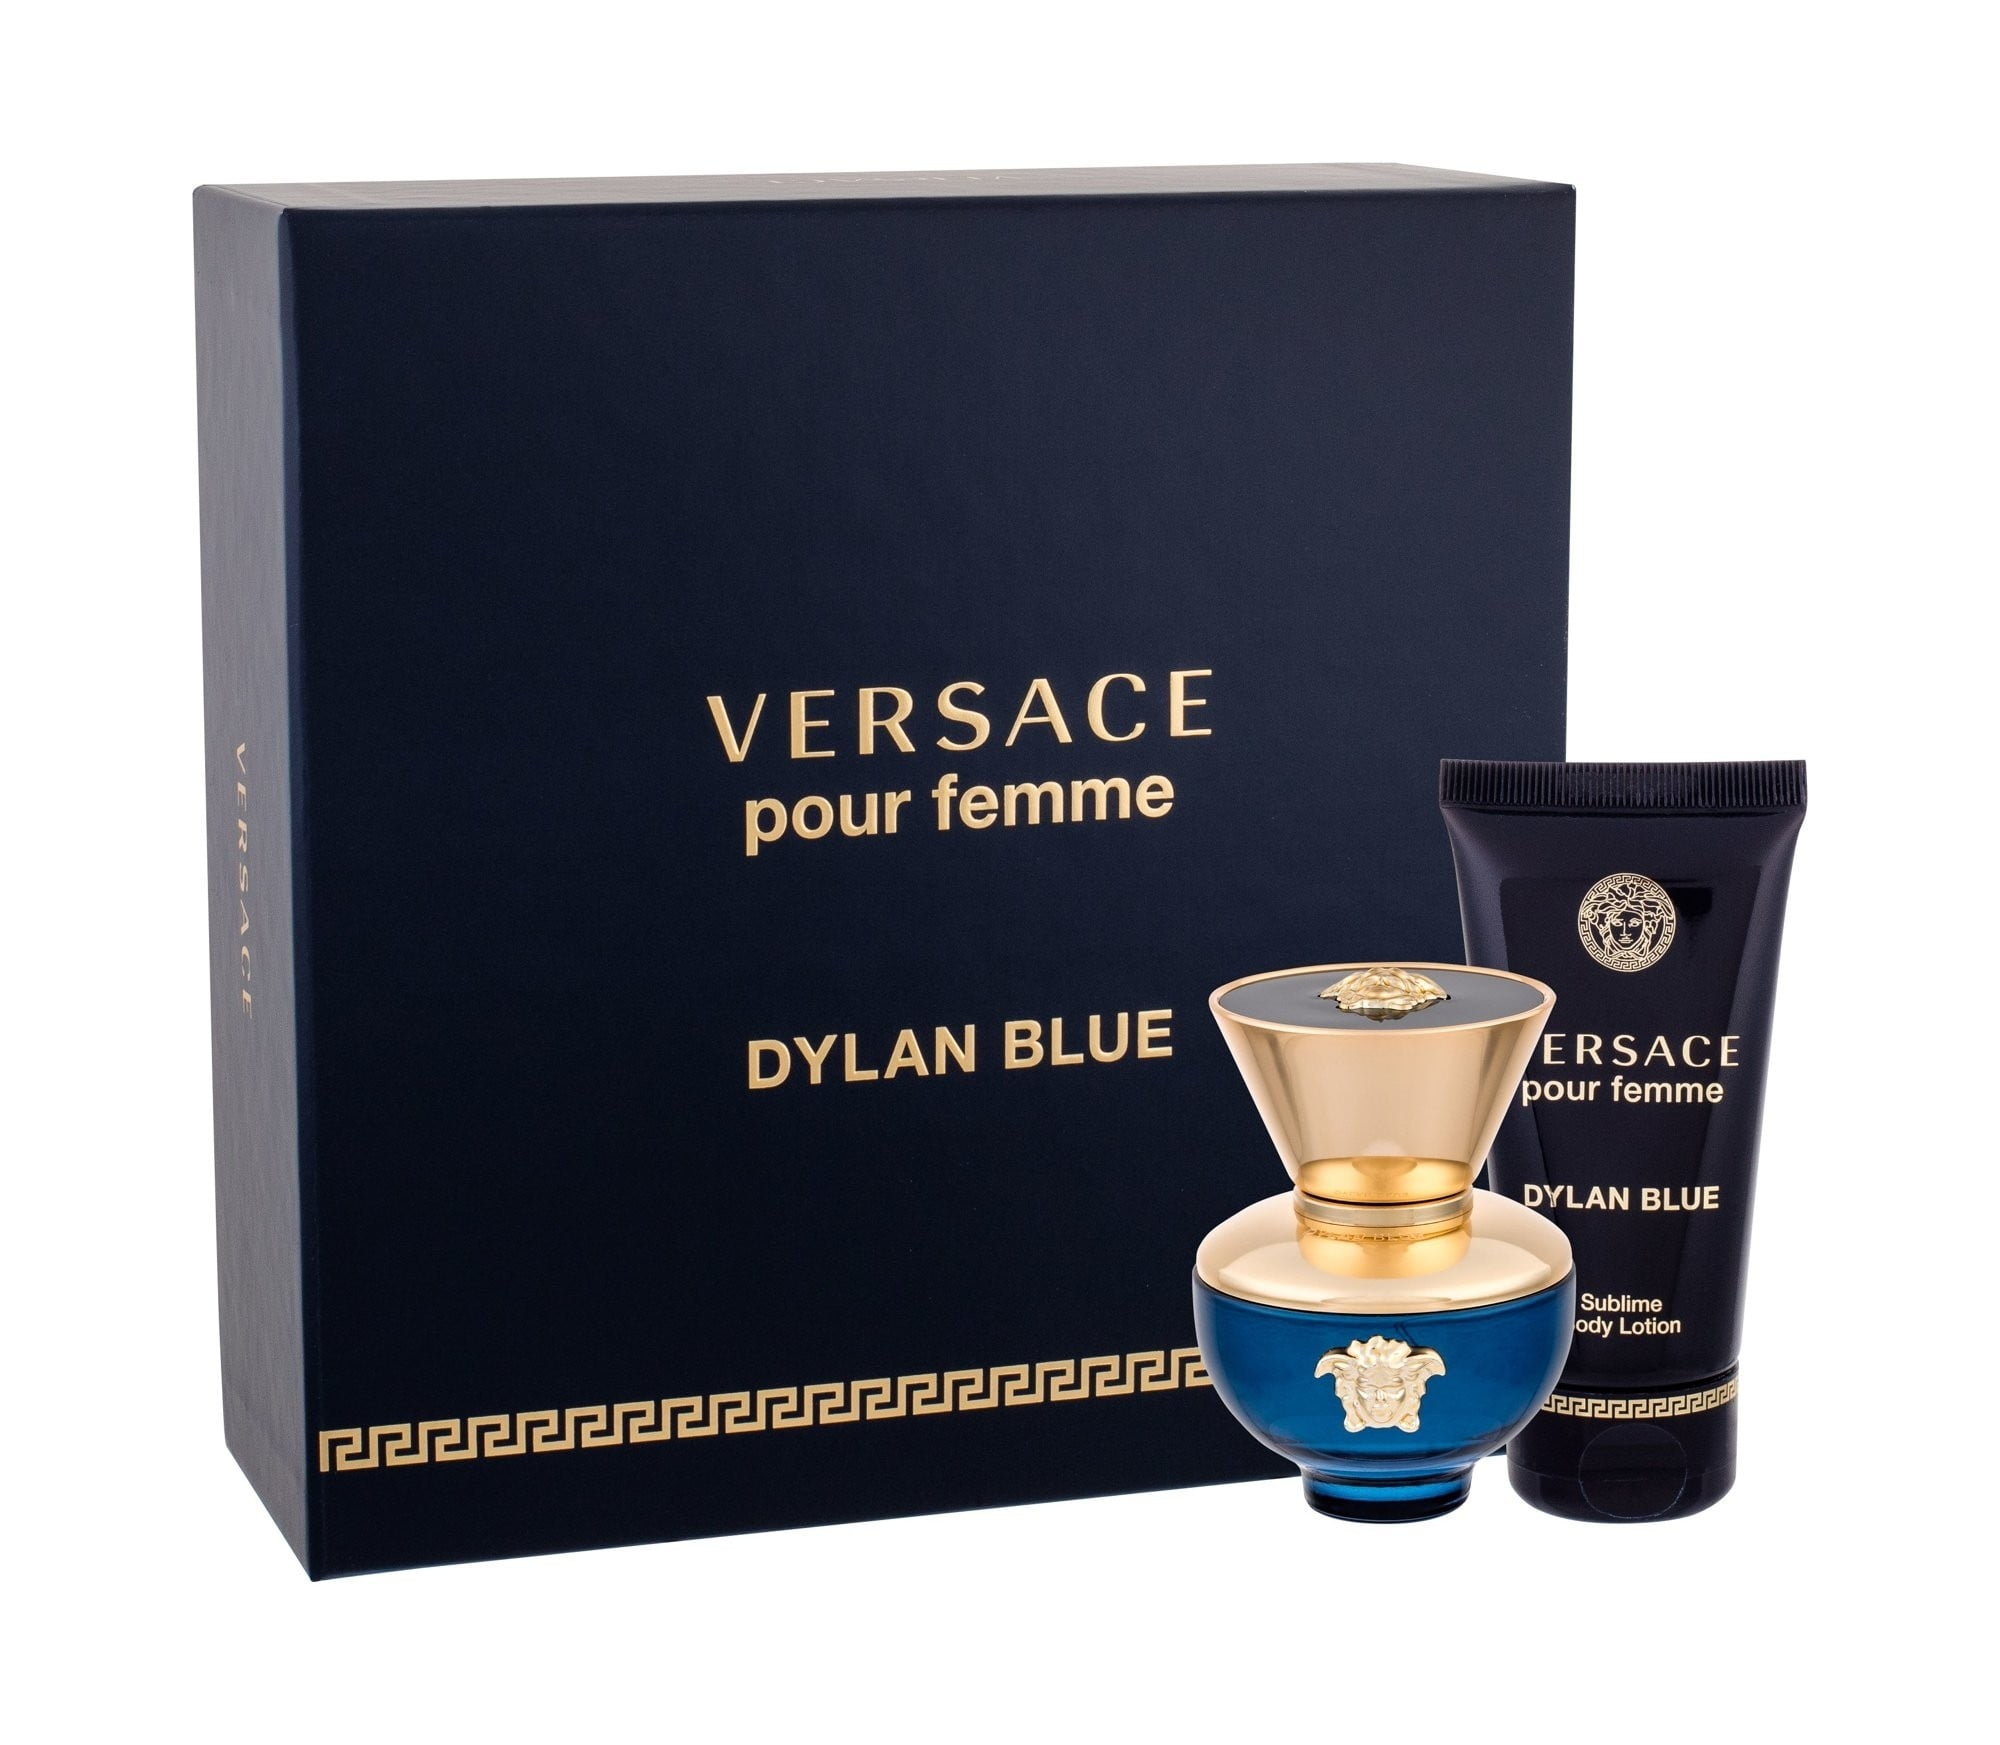 Versace Versace Dylan Blue Pour Femme Perfume Gift Set For Women 2